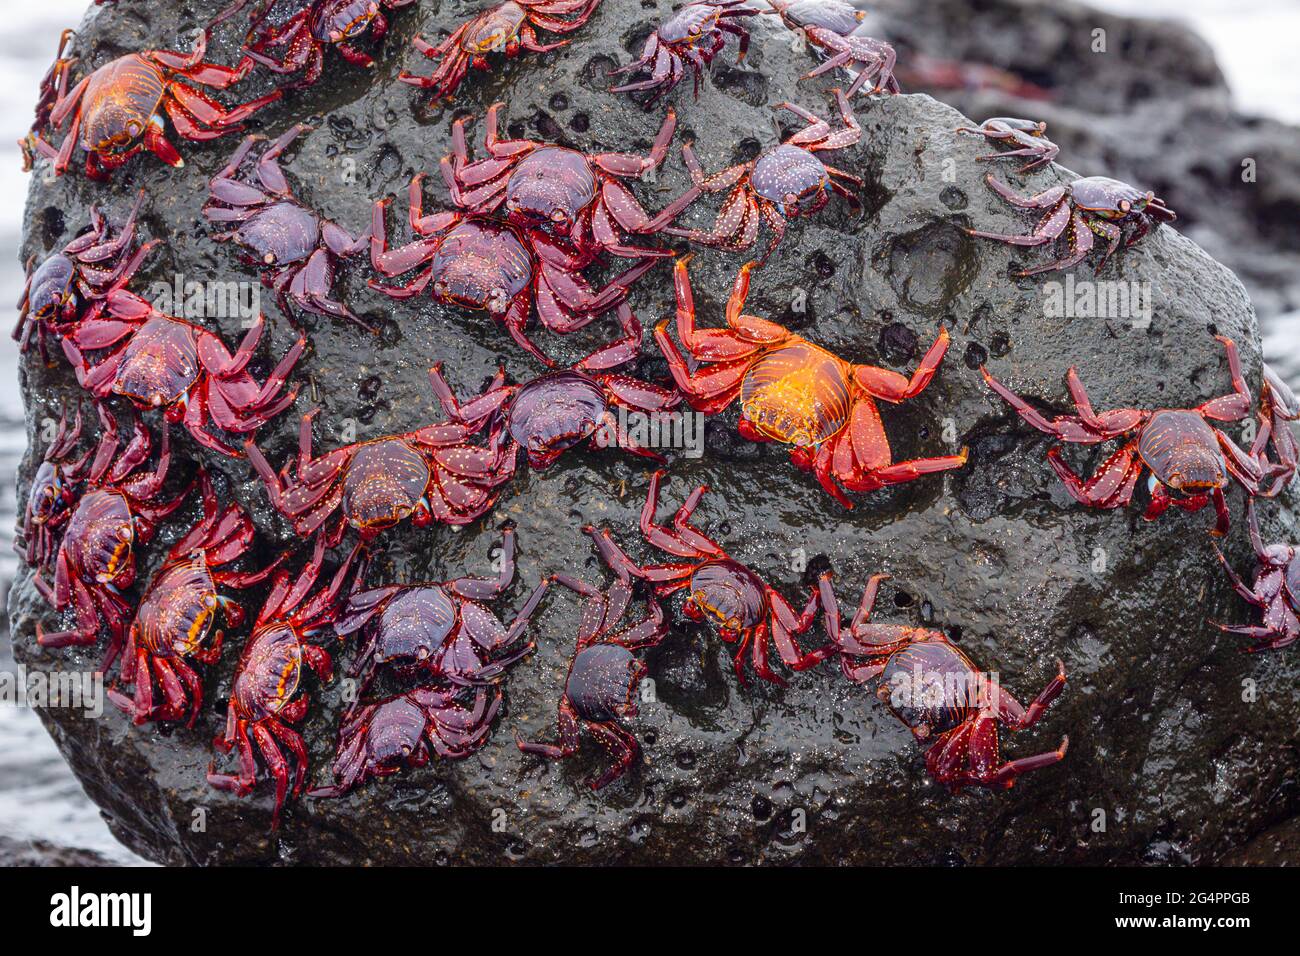 Sally Lightfoot Crabs, Graspus graspus, cover a boulder in their search for algae to dine on in this intertidal zone, Santa Cruz Island, Galapagos. Stock Photo